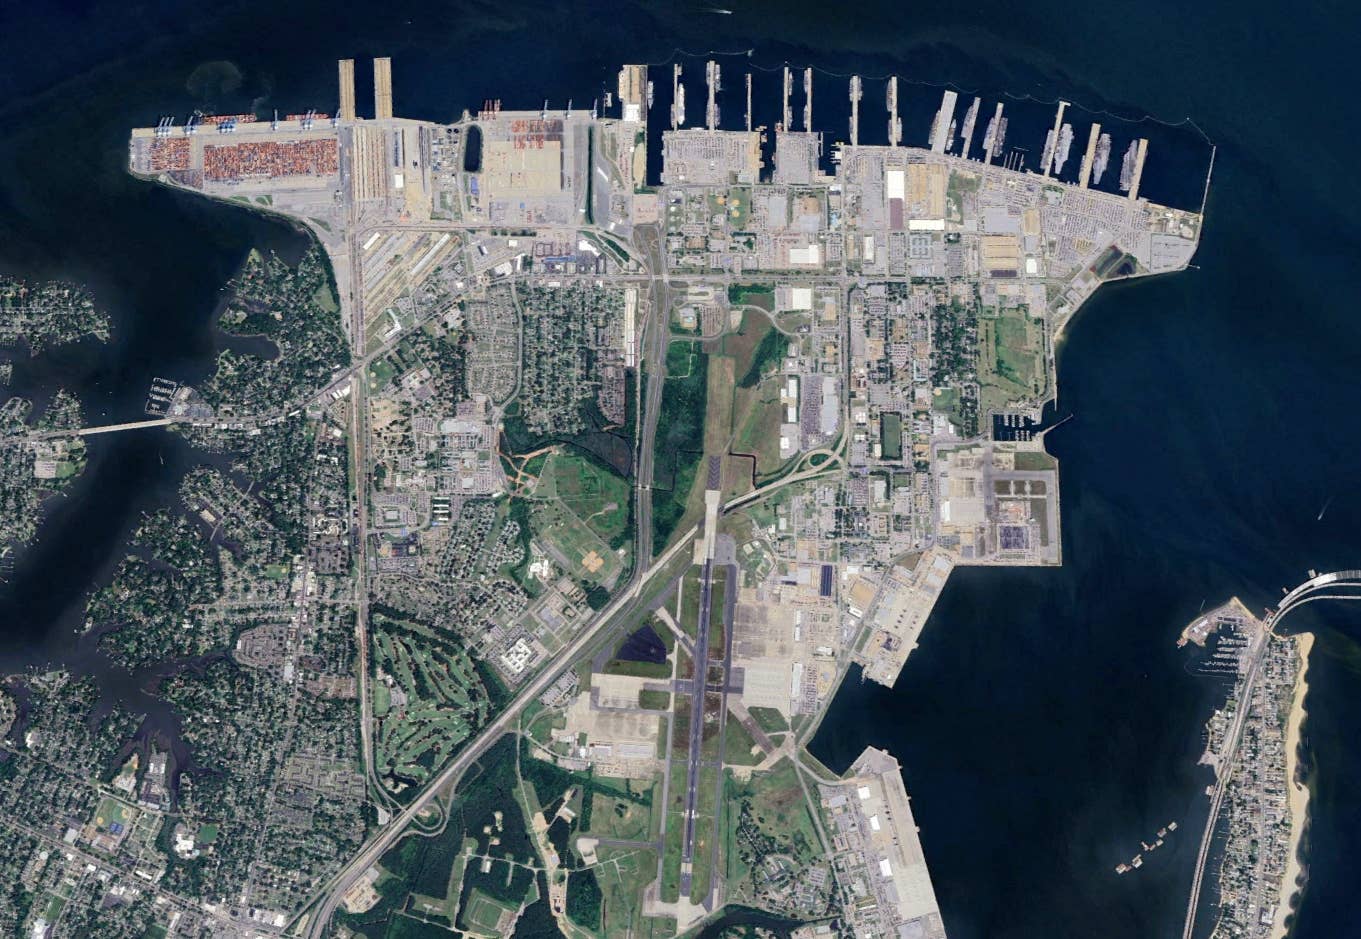 A satellite image showing Naval Base Norfolk and Naval Air Station Norfolk, collectively known as Naval Station Norfolk. <em>Google Earth</em>